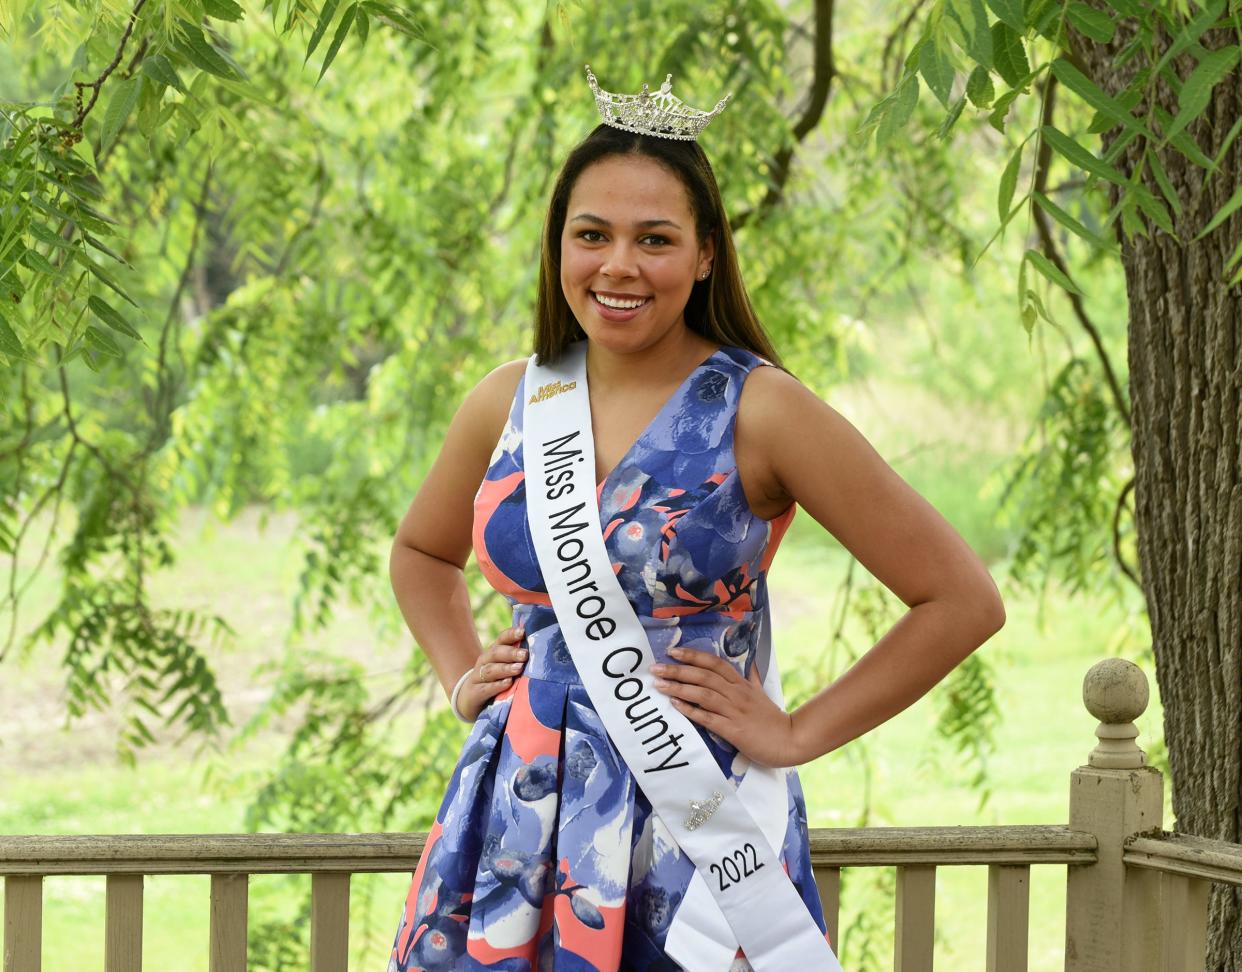 Miss Monroe County Payton Perry-Radcliffe, shown at her LaSalle home, is leaving for the Miss Michigan competition today. "My grandpa (Ritch Radcliffe) and I used to see who could throw the walnuts from the trees the furthest here from this deck when I was in preschool," Perry-Radcliffe said.